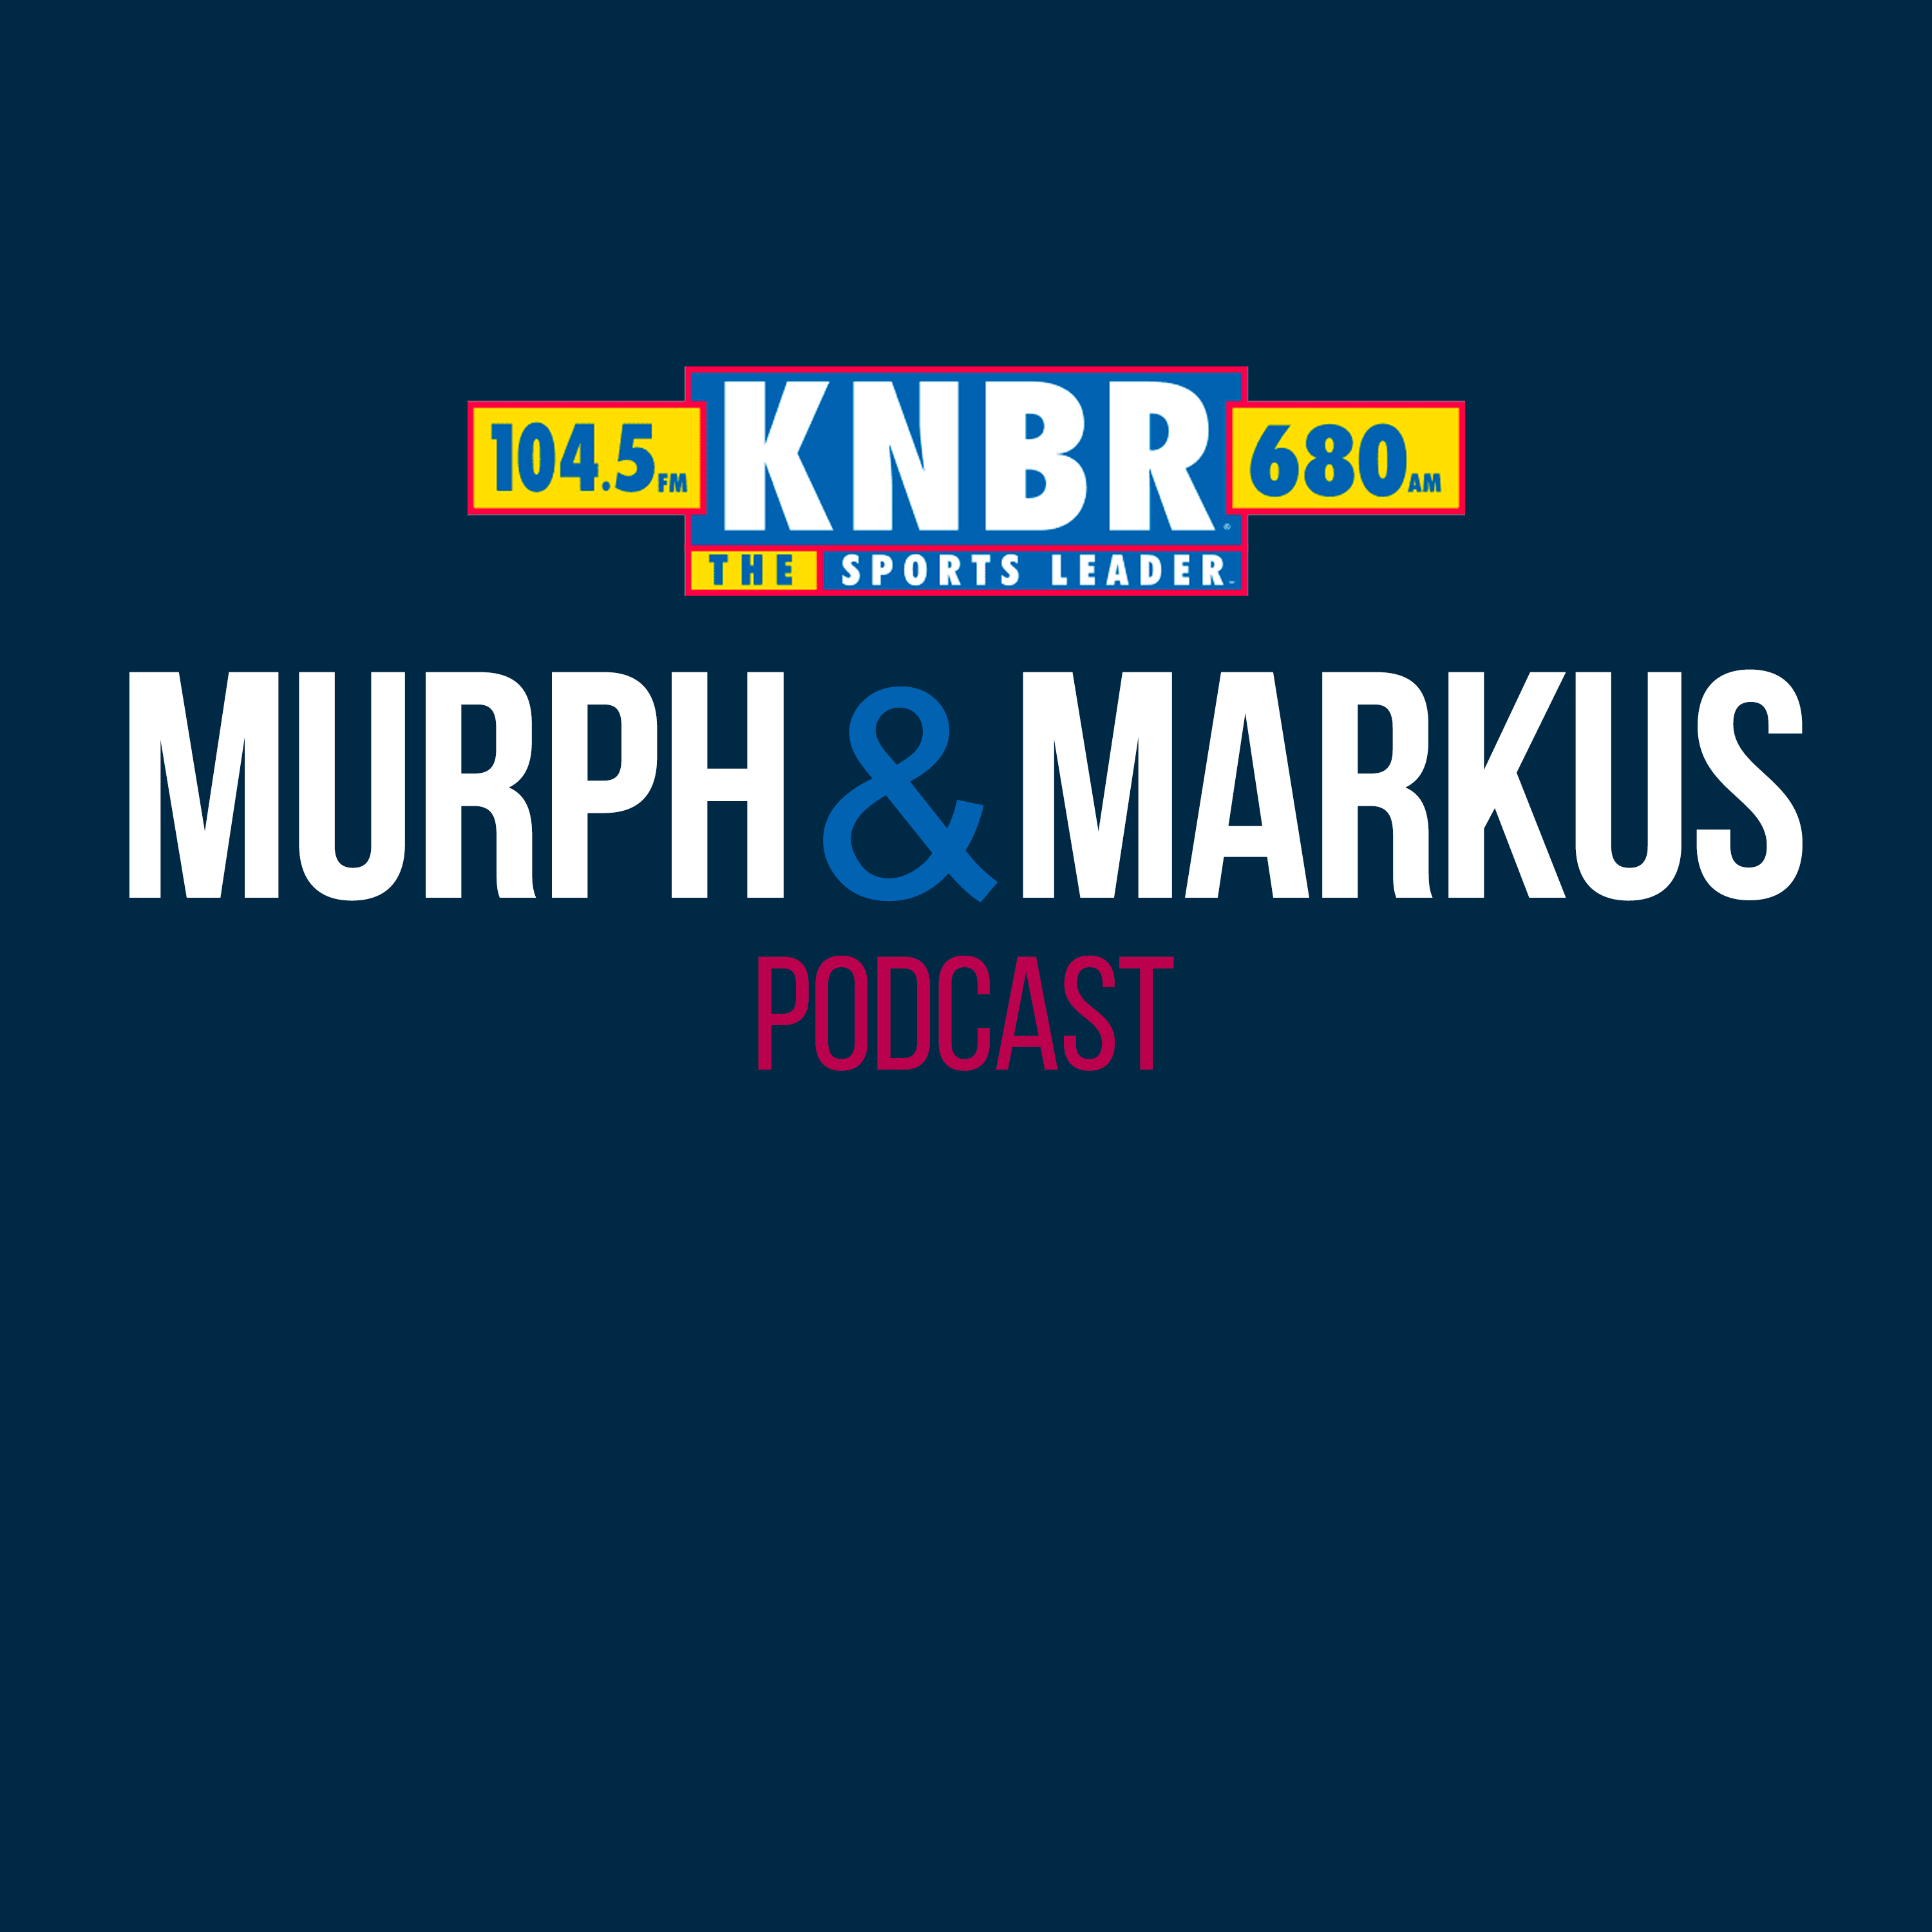 5-2 Hour 4: Murph & Markus preview the final game of the Giants vs Red Sox series and talk to Jon Miller